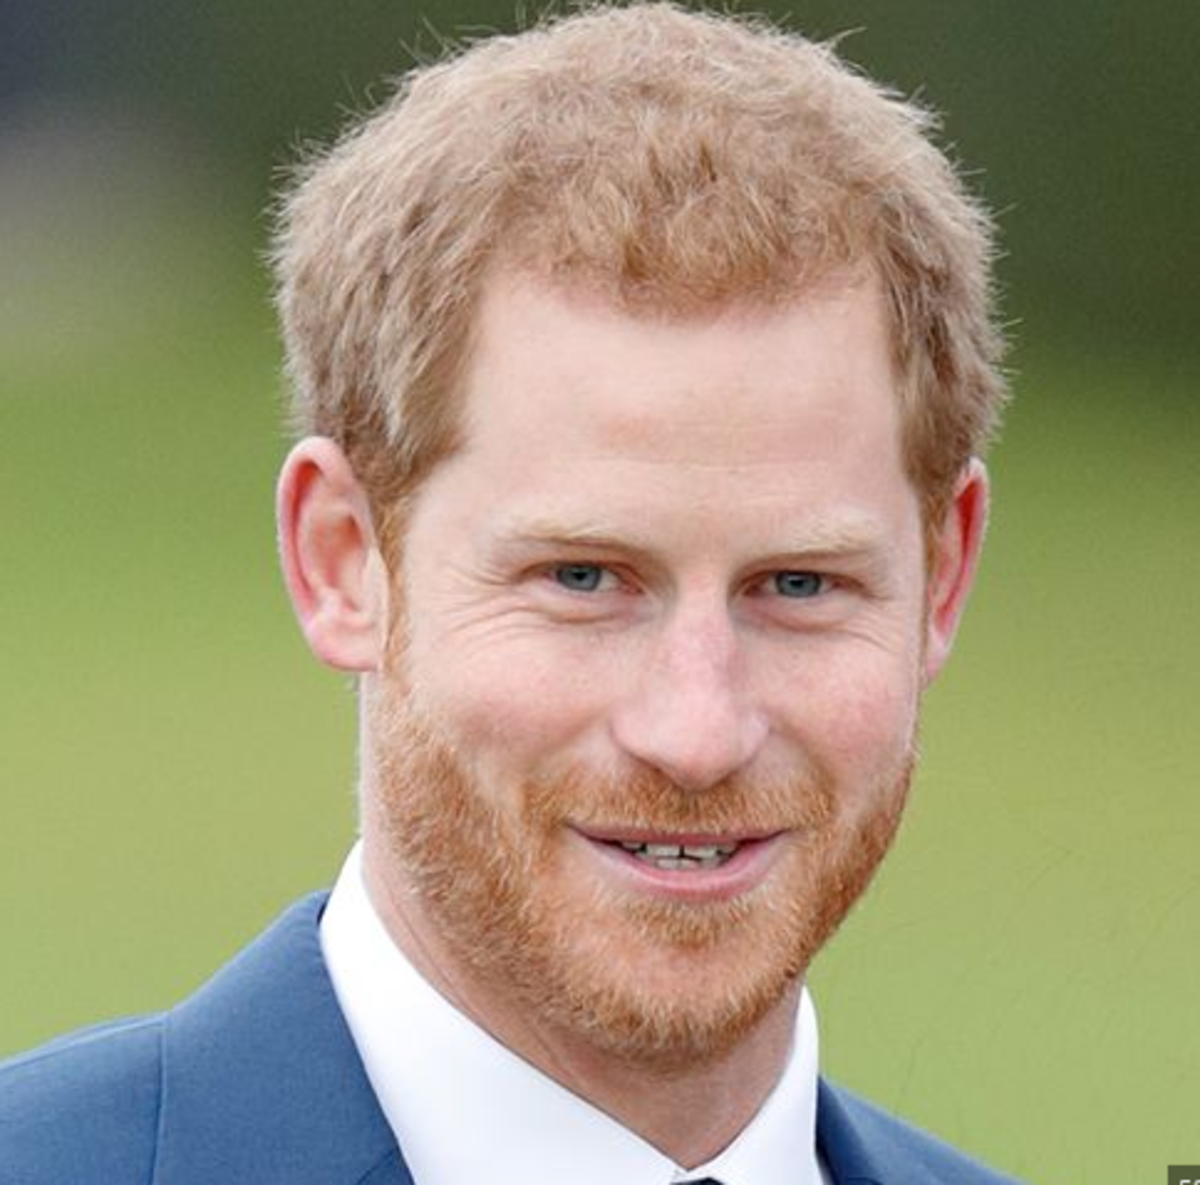 Prince Harry Continues to Be the Subject of Conflicting Reports